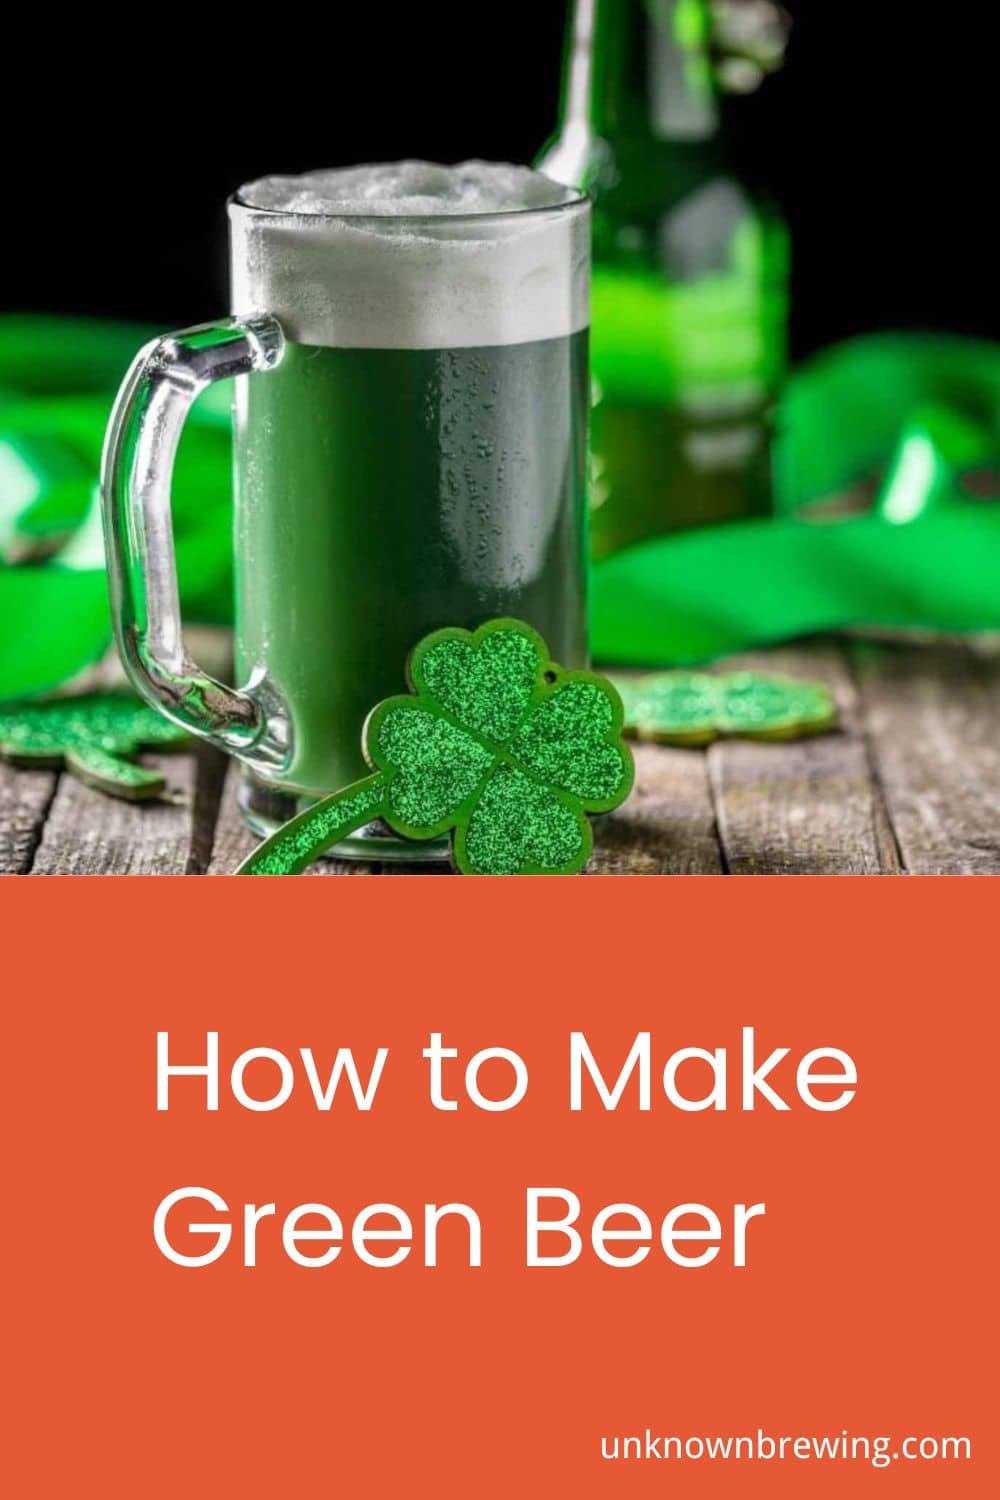 how to Make Green Beer